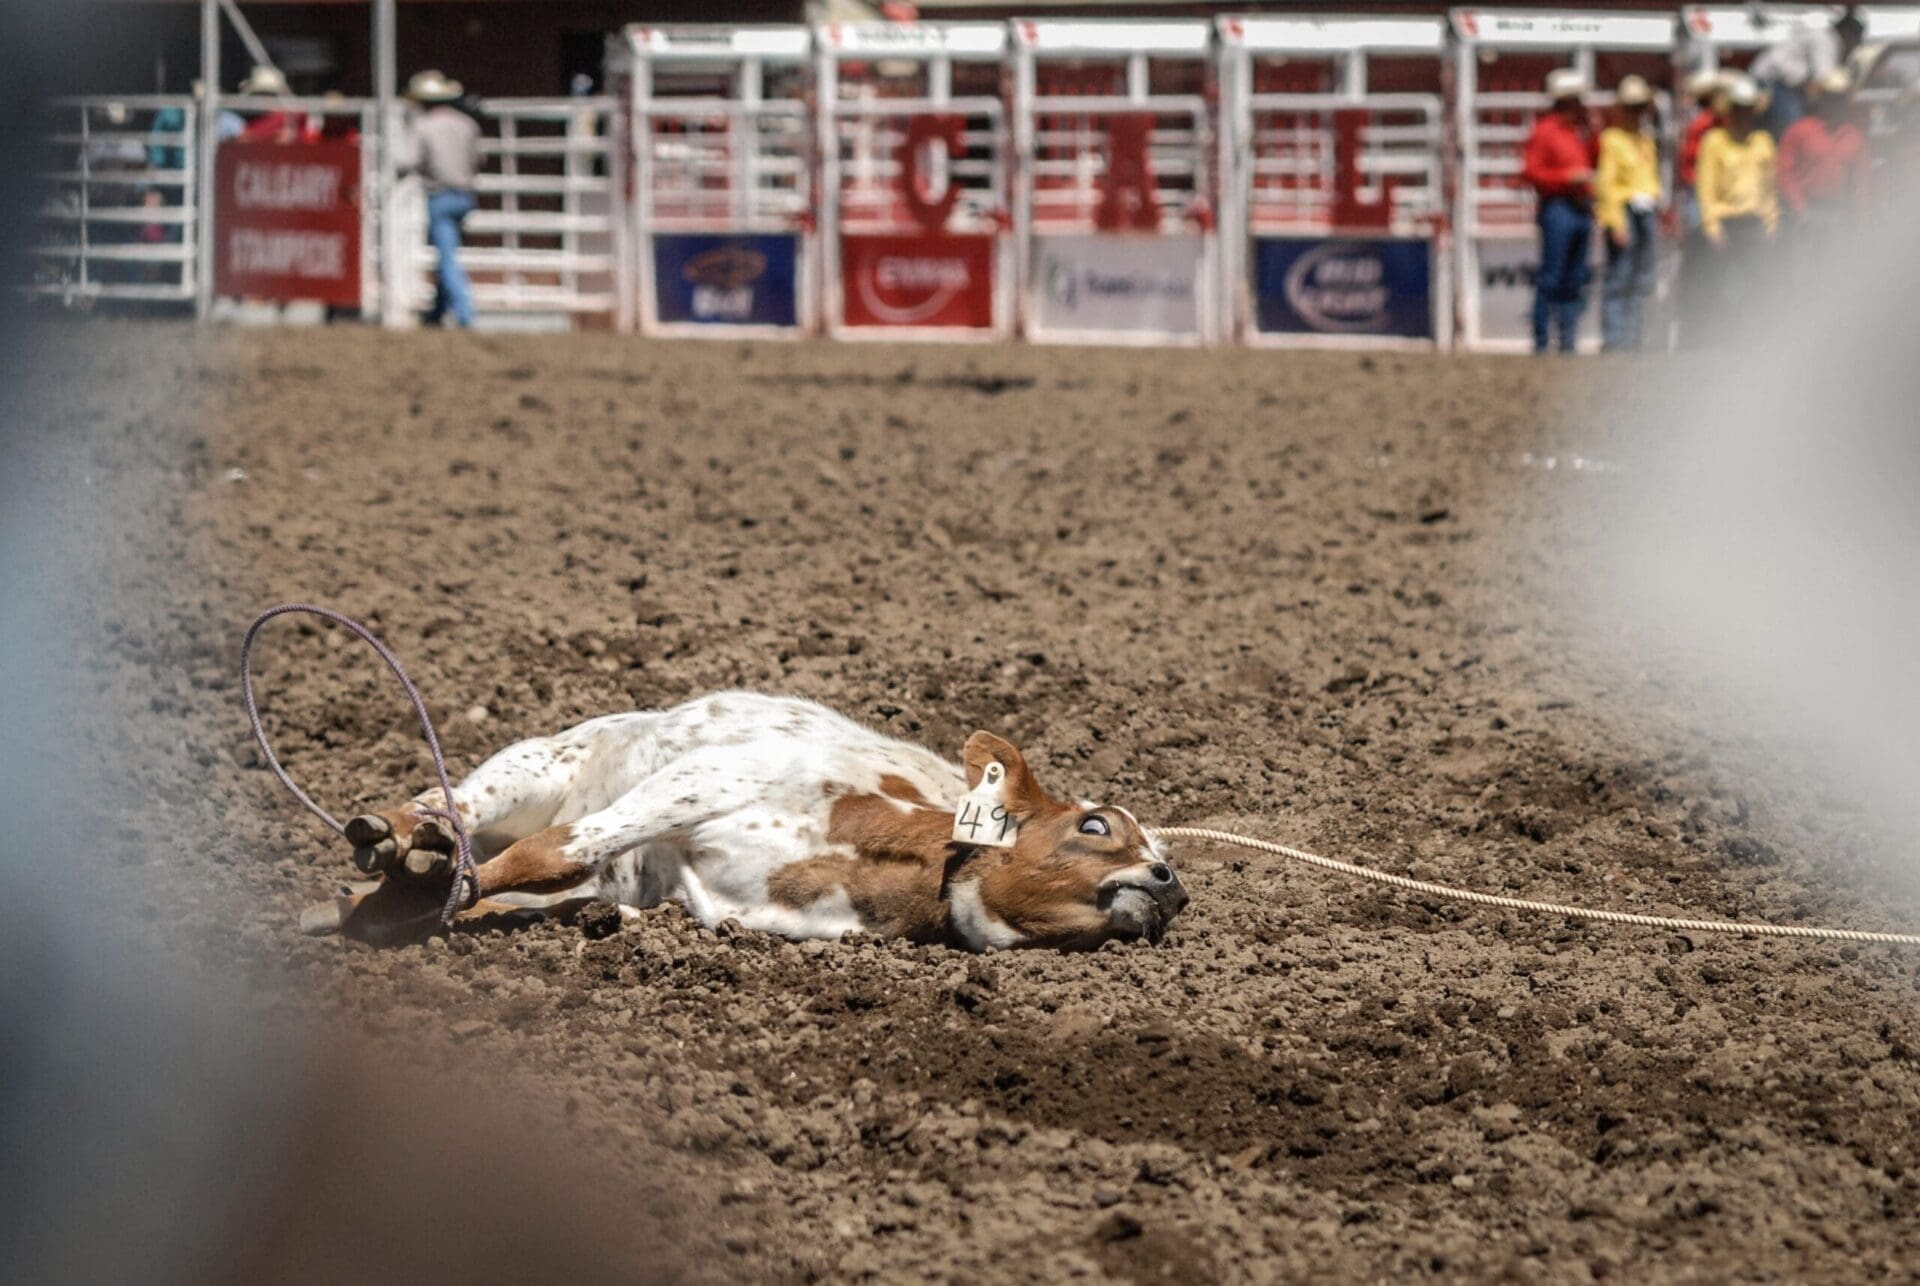 A roped calf lies on the ground at the Calgary Stampede rodeo